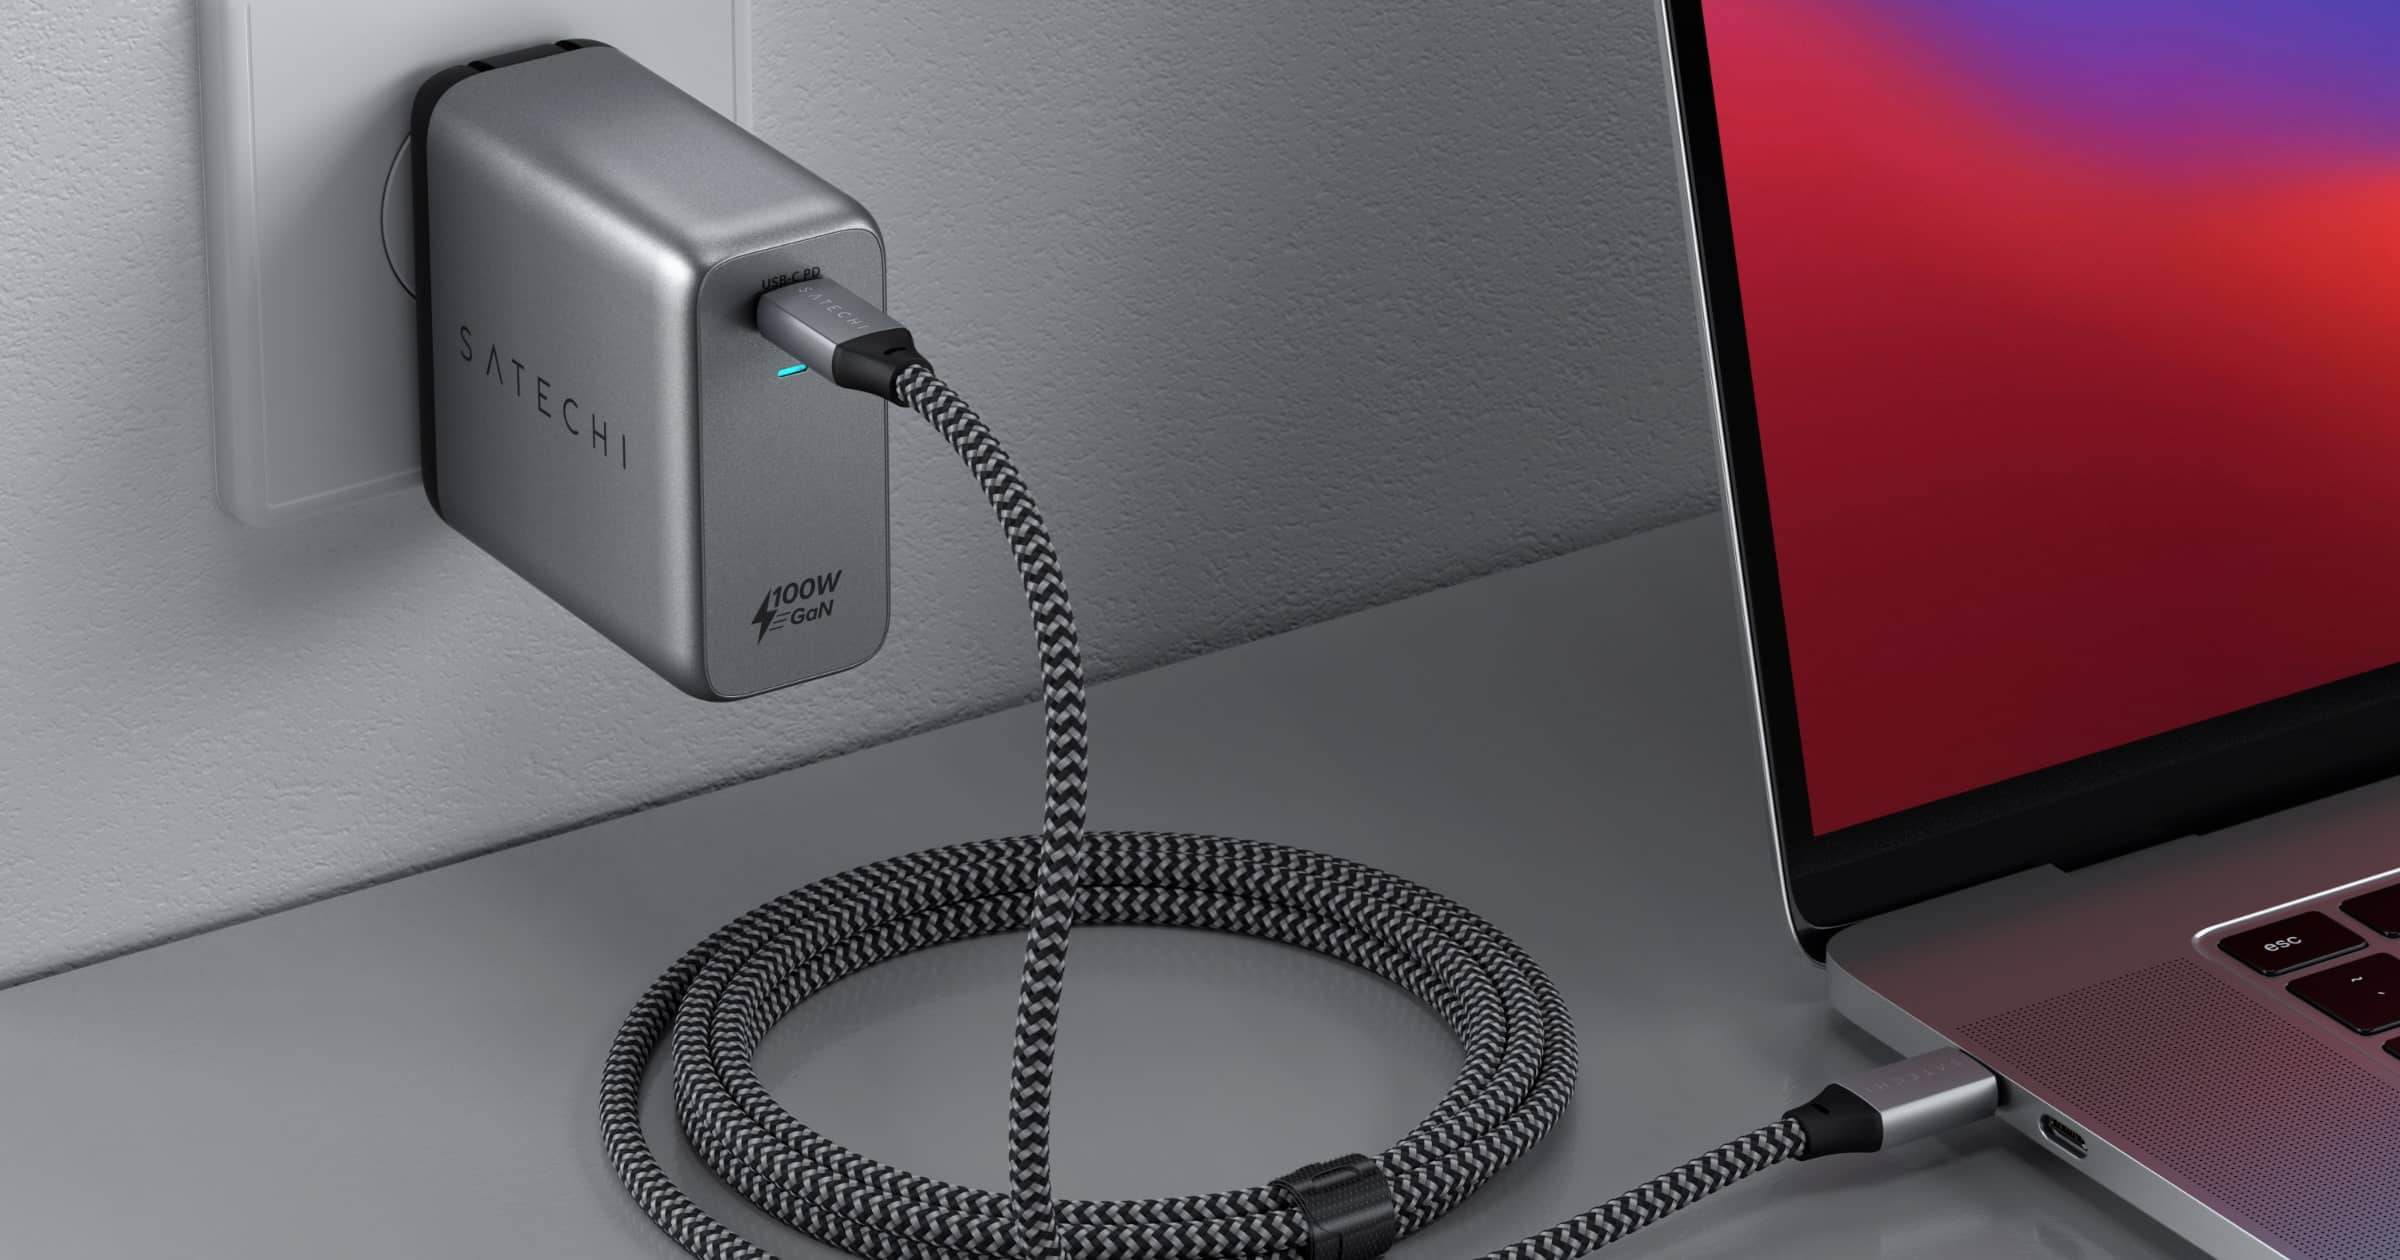 Sale: Satechi Chargers are 20% Off Through December 5